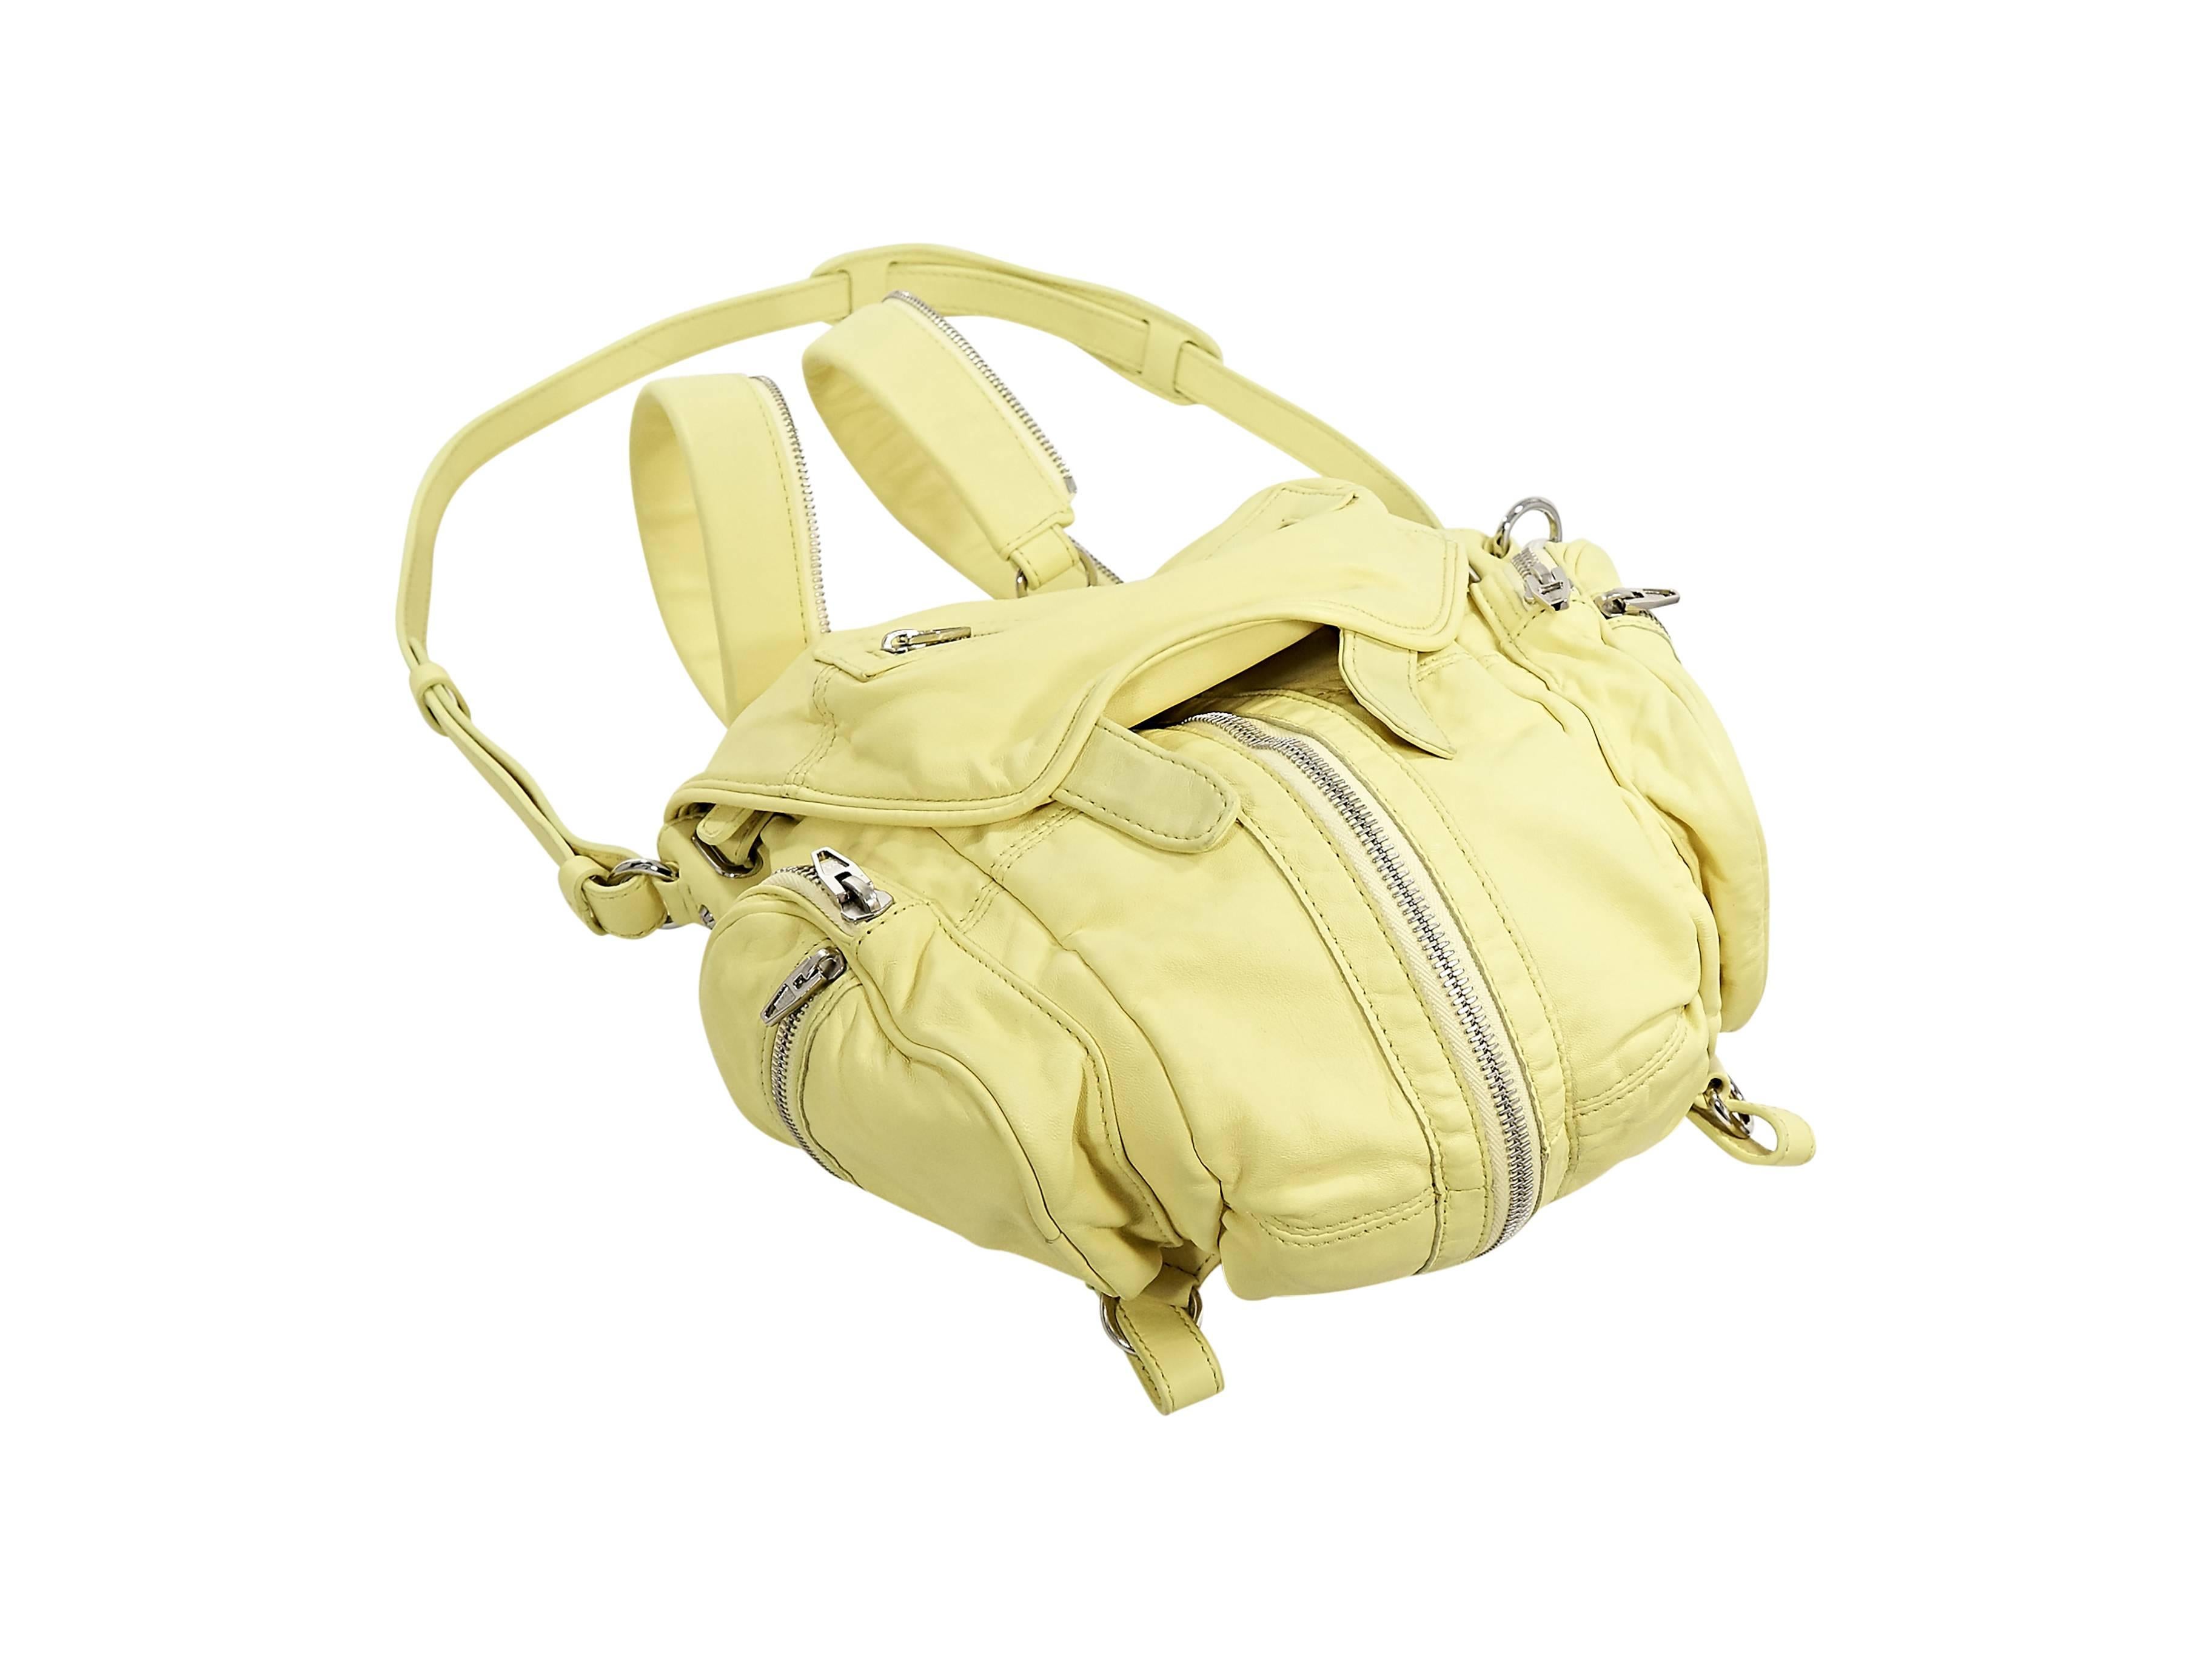 Product details:  Yellow leather Marti convertible backpack by Alexander Wang.  Zip-apart shoulder straps or carry handles.  Optional, detachable crossbody strap.  Front flap with zip pocket.  Expandable front zip gusset.  Side double zip pockets. 